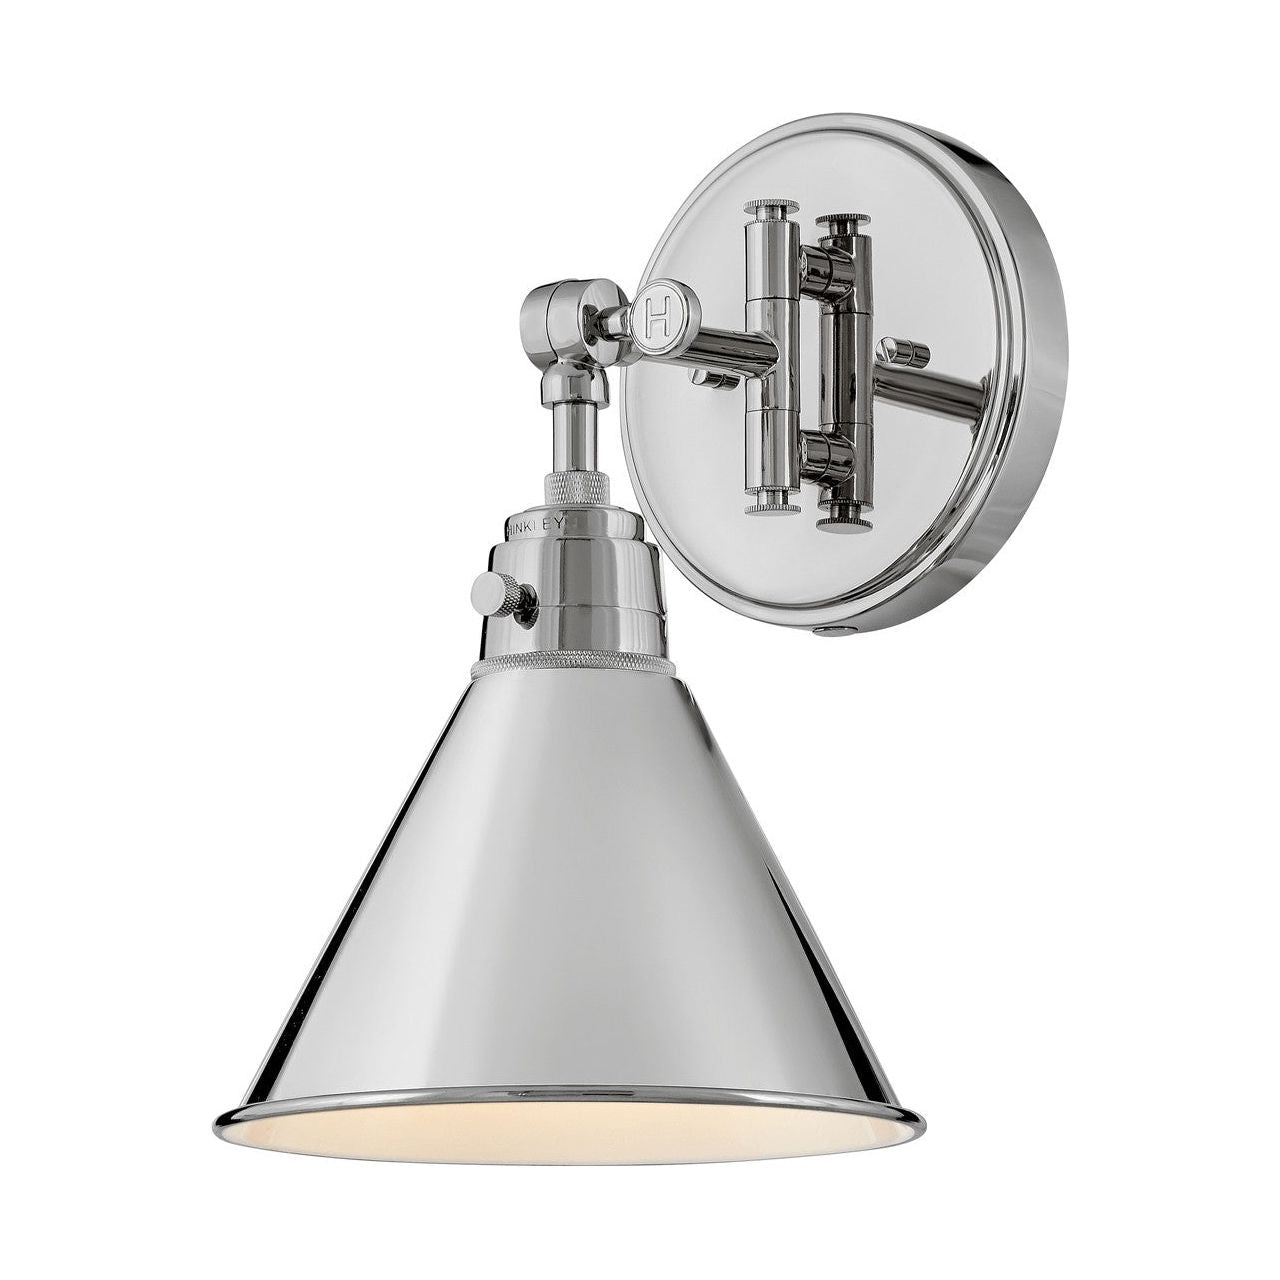 Hinkley Canada - 3691PN - LED Wall Sconce - Arti - Polished Nickel